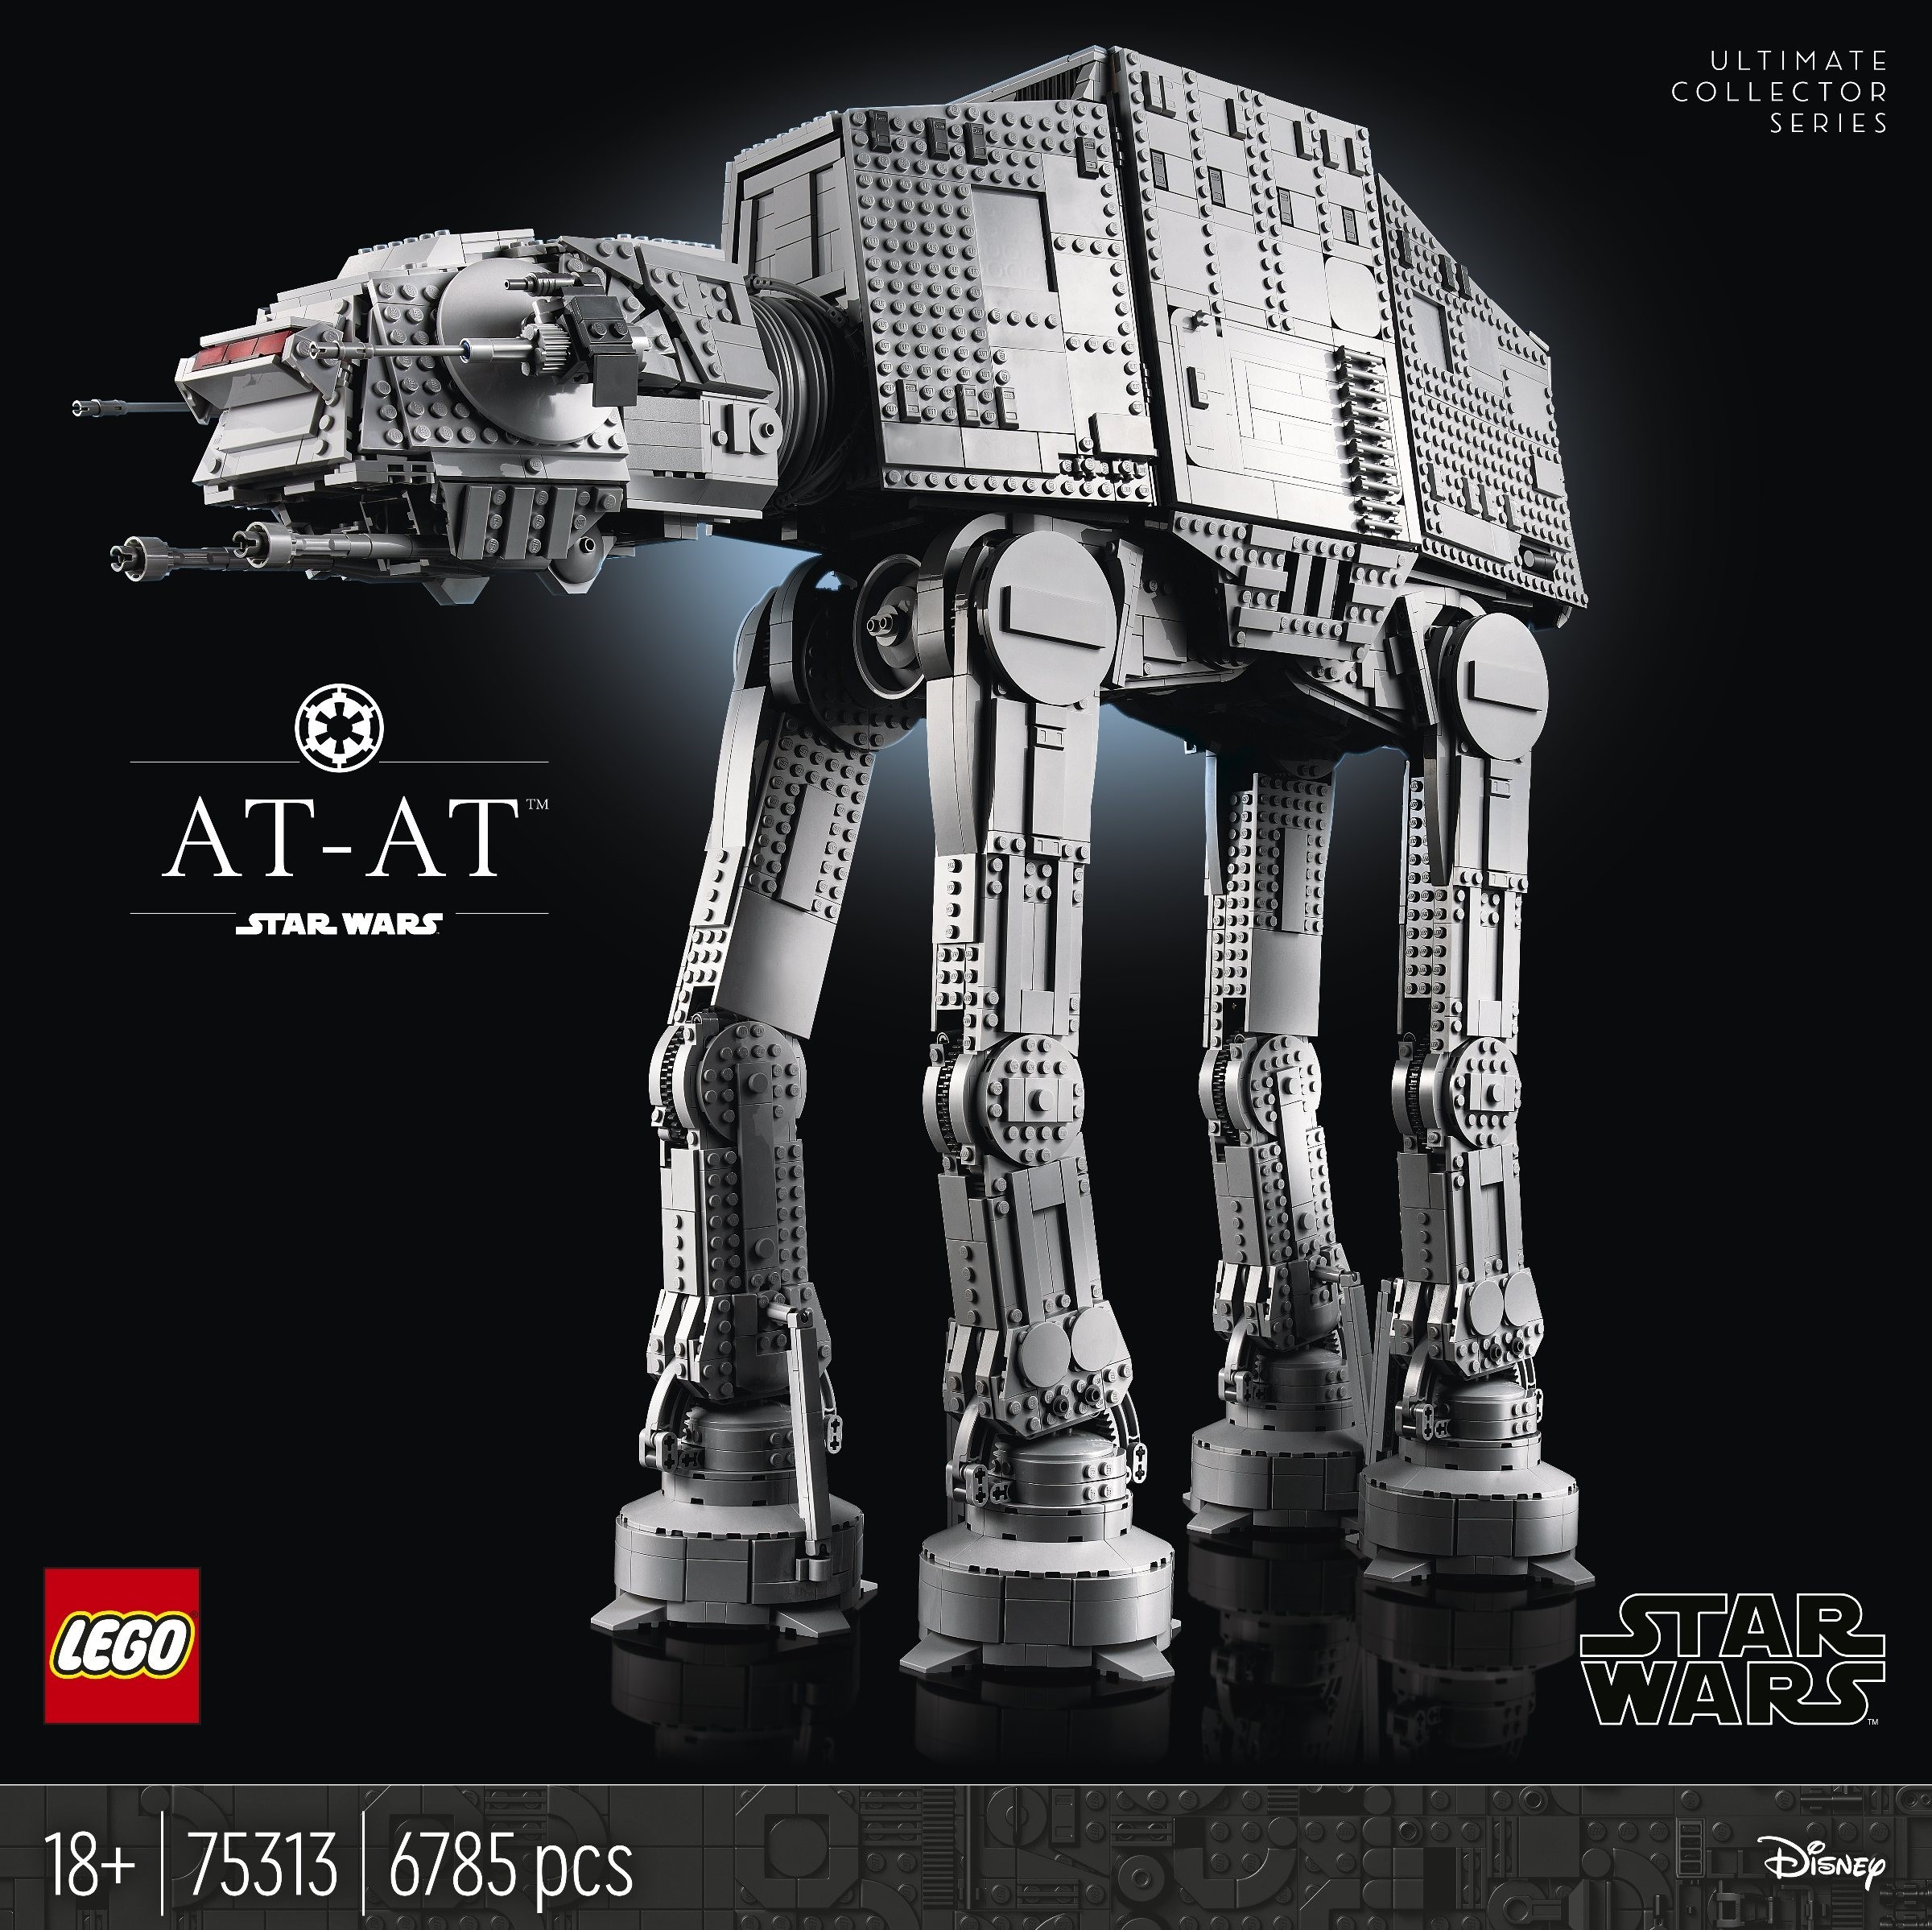 AT-AT set showdown - Mould King vs Lego UCS - Which is the better set? 